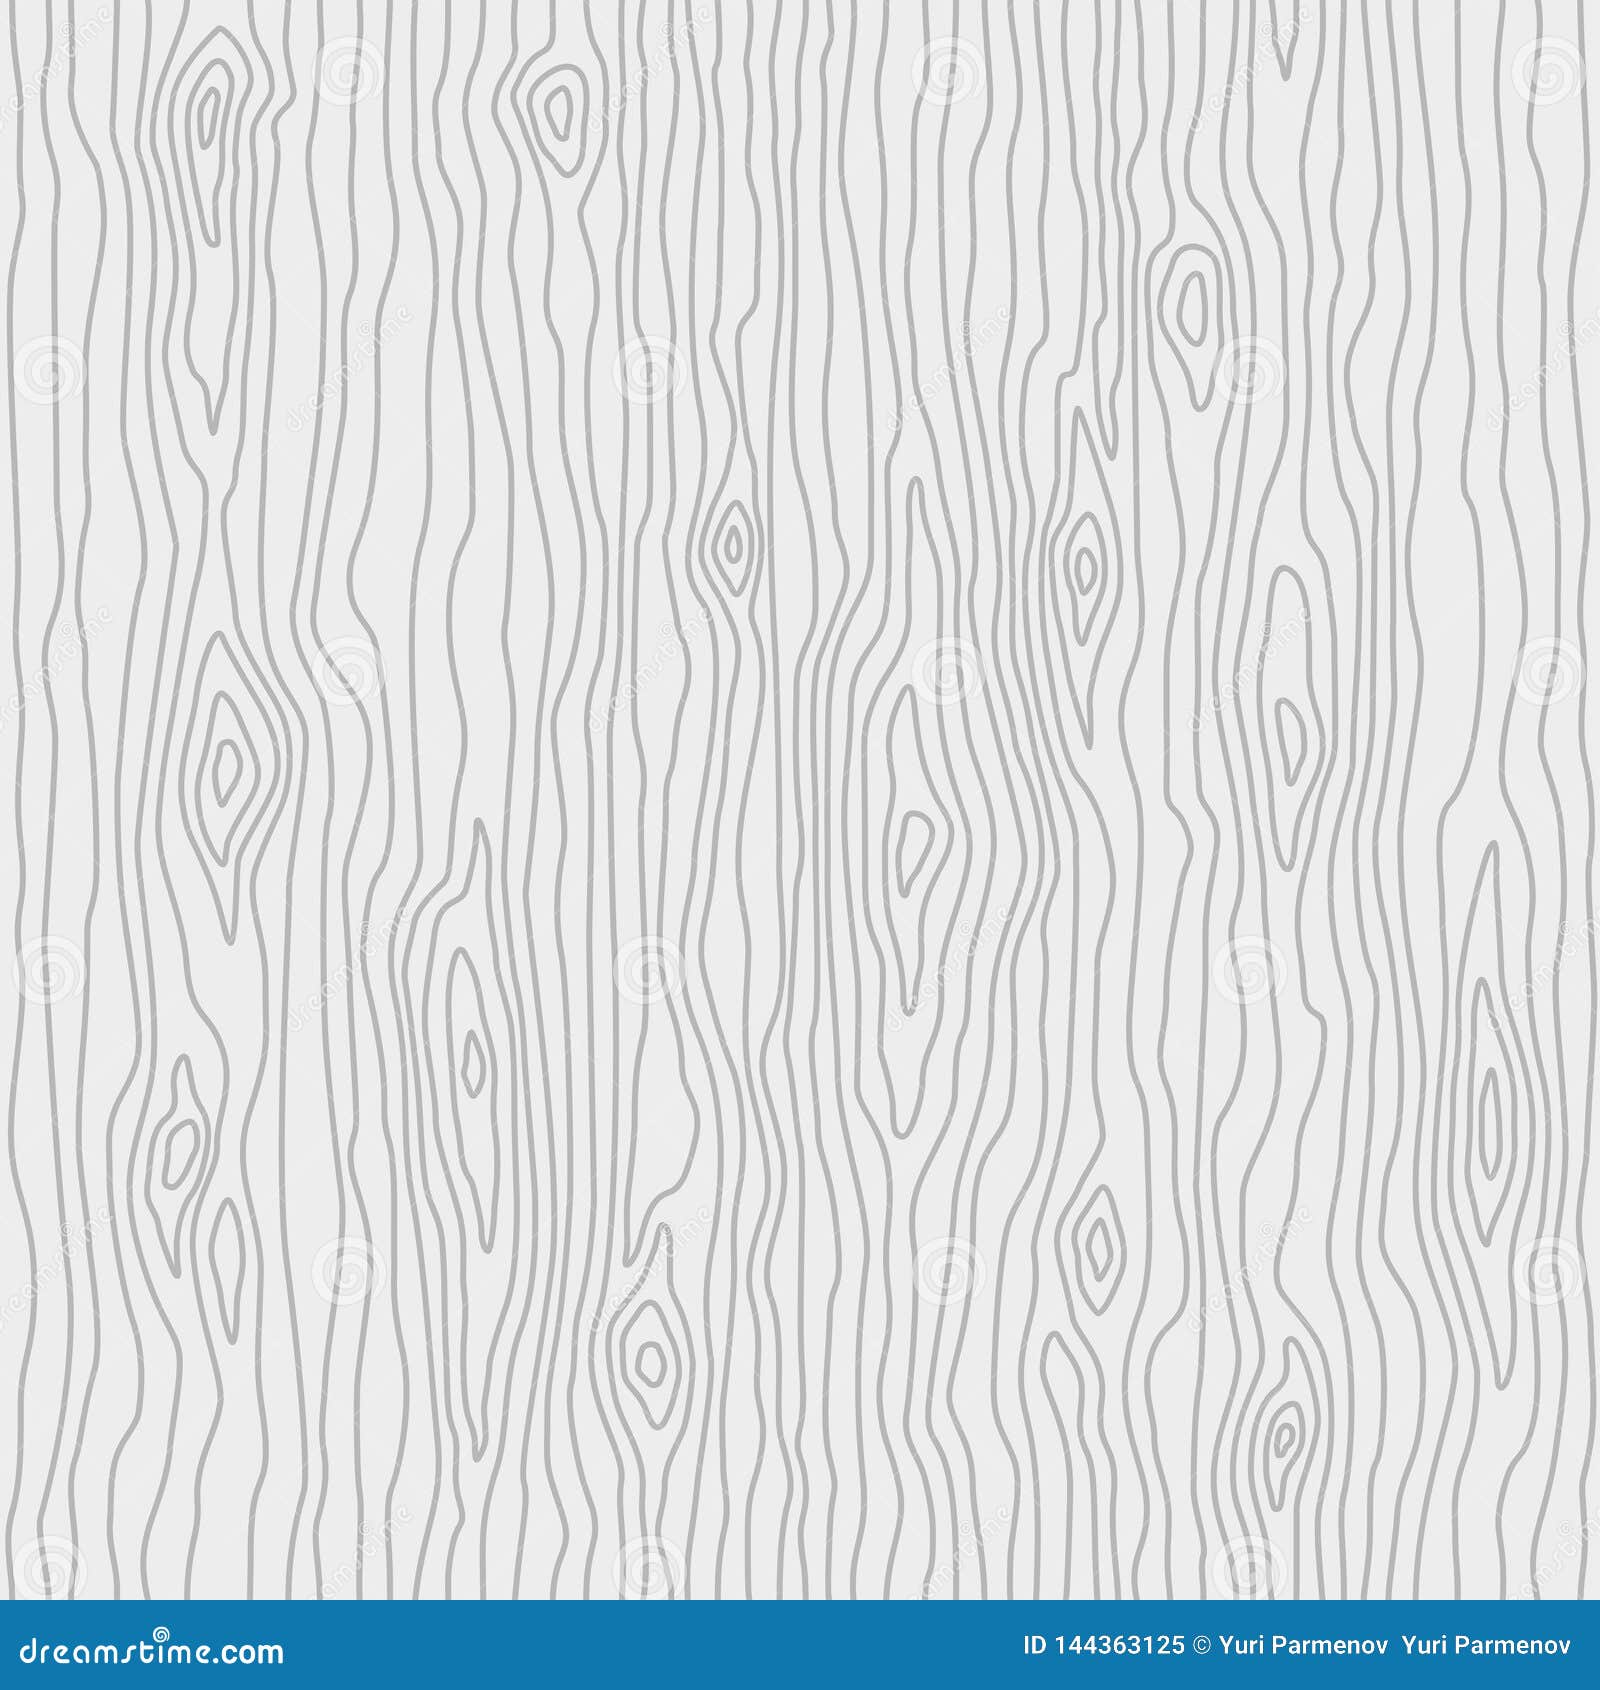 Vector Background of White Wooden Texture. Line Pattern Stock Vector ...